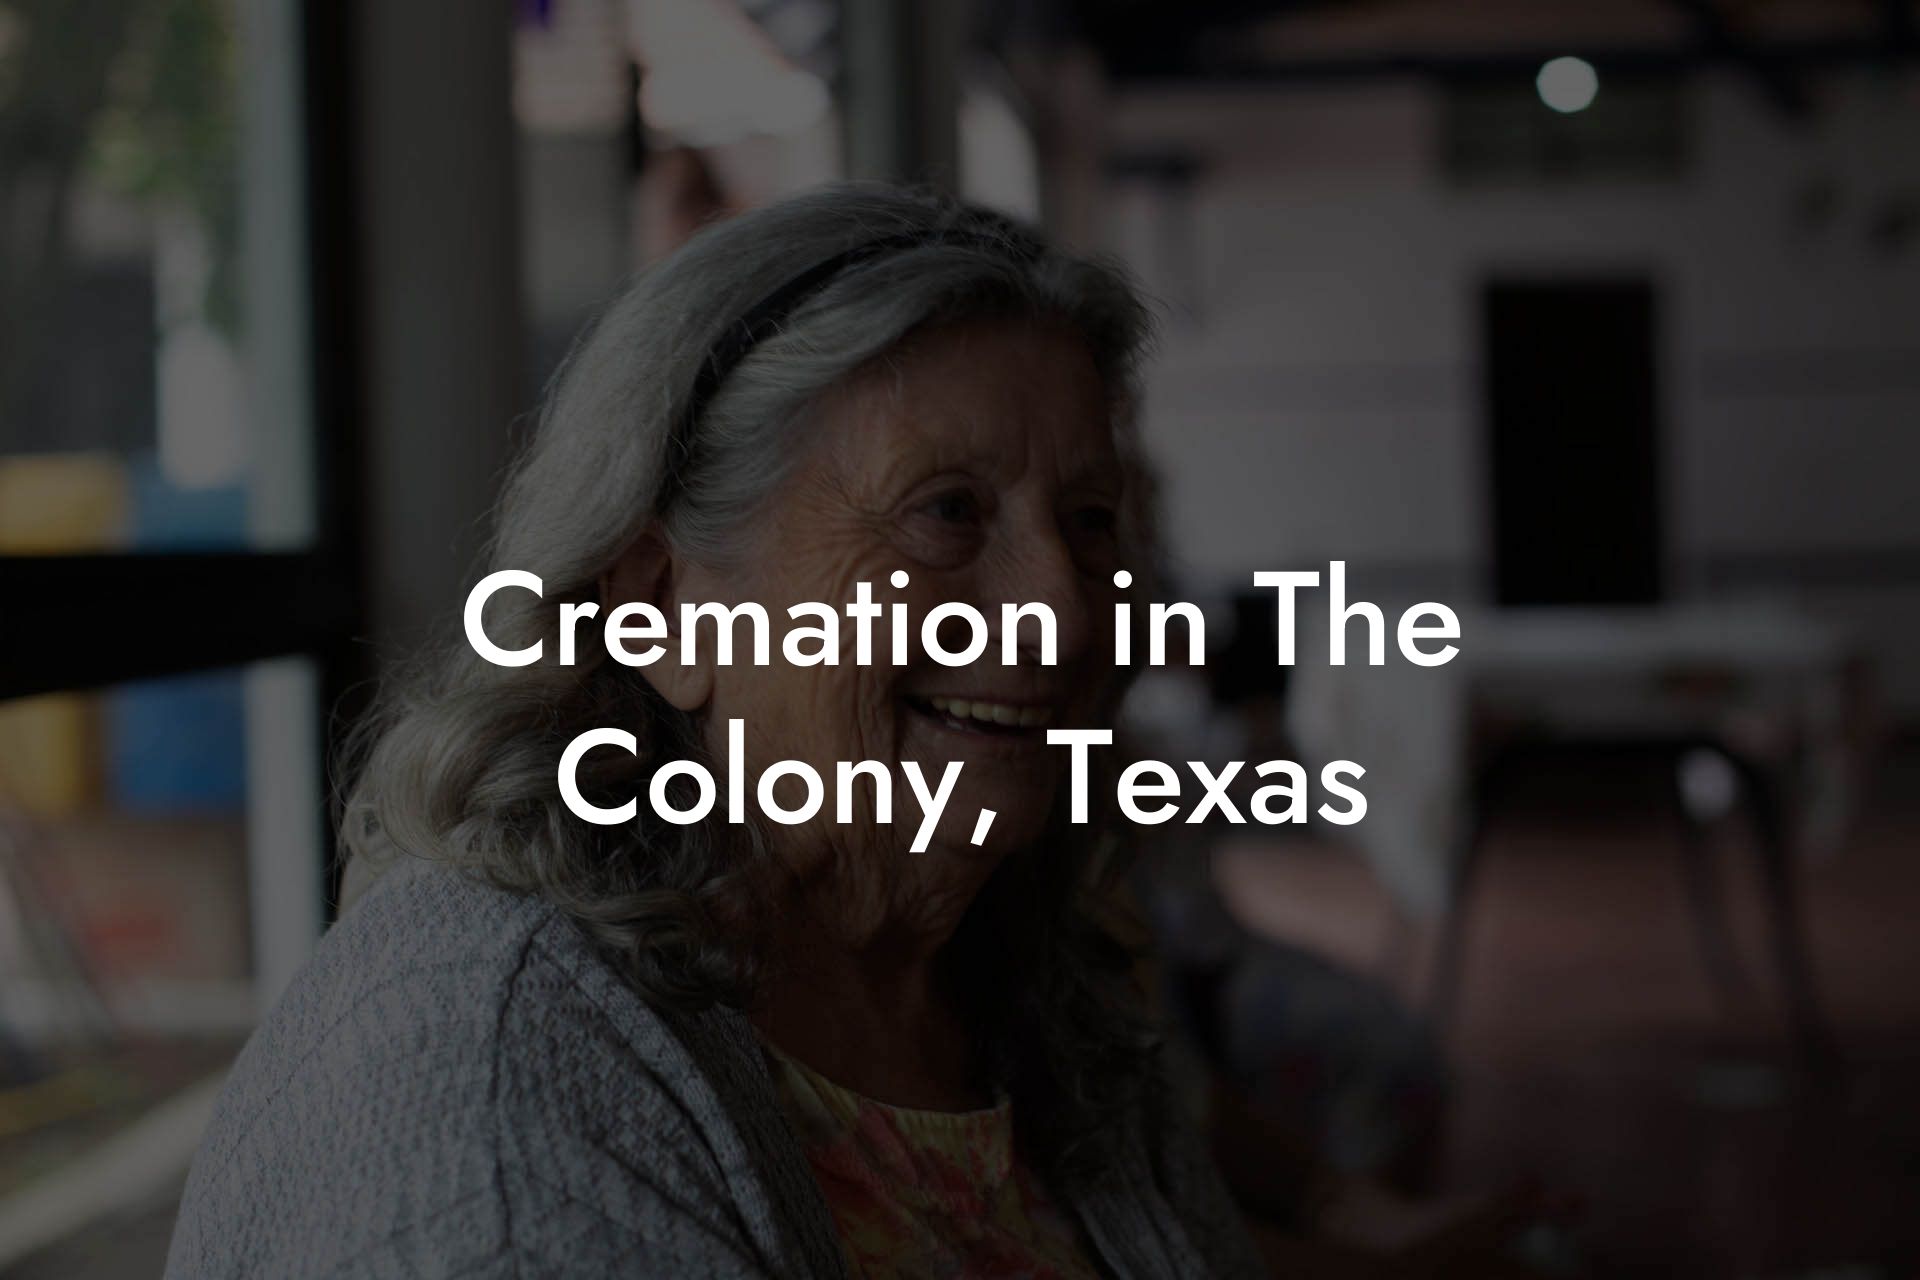 Cremation in The Colony, Texas